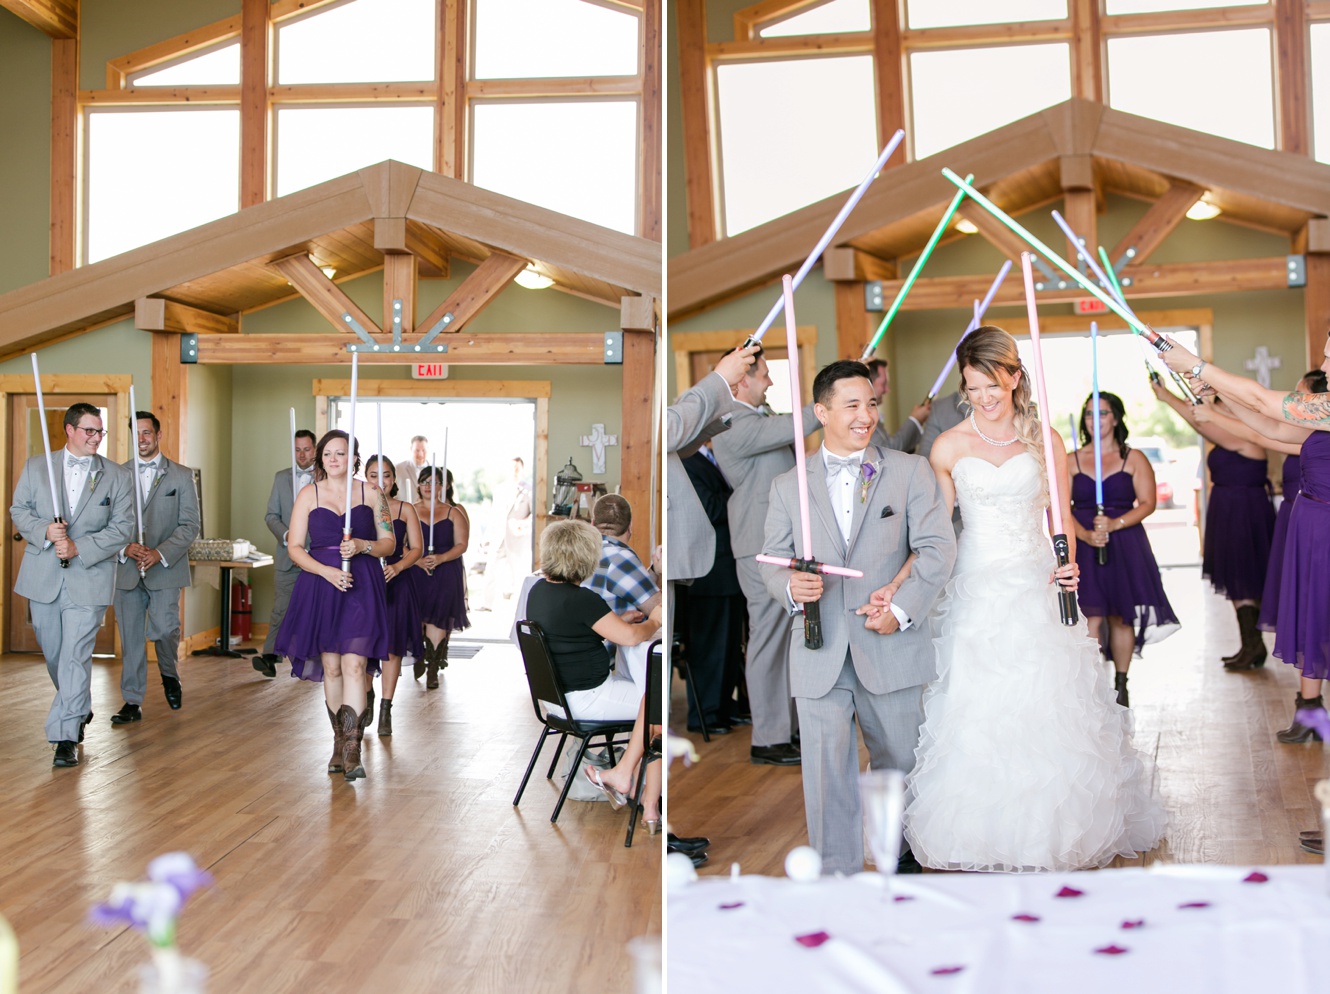 Star wars entrance to wedding reception with light sabres photo